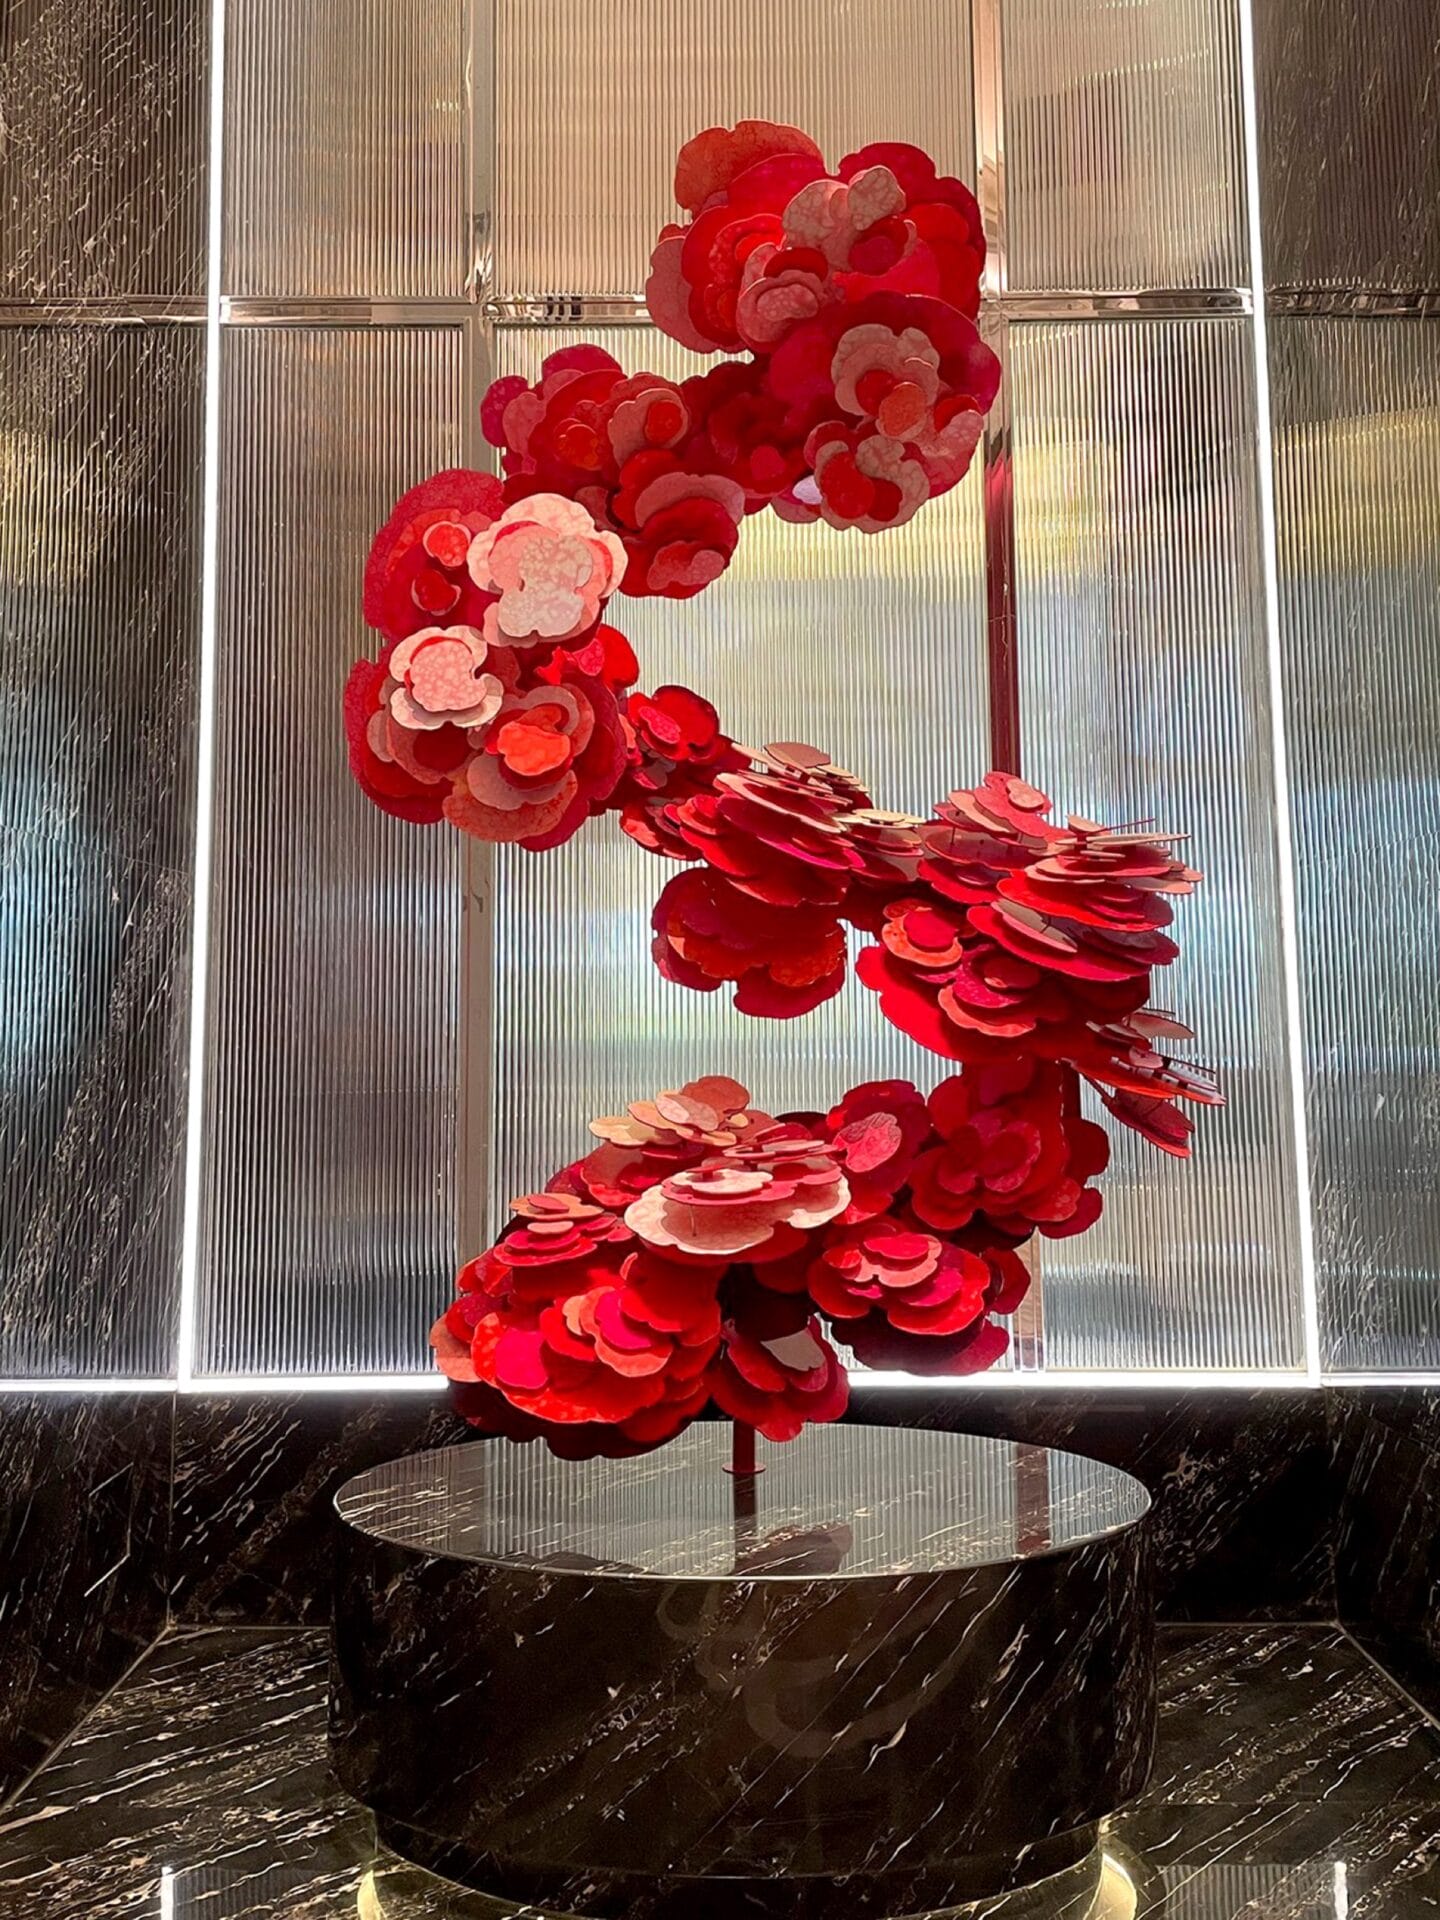 a sculpture made of red, petal-like shapes undulating from a marble plinth in an S-shape